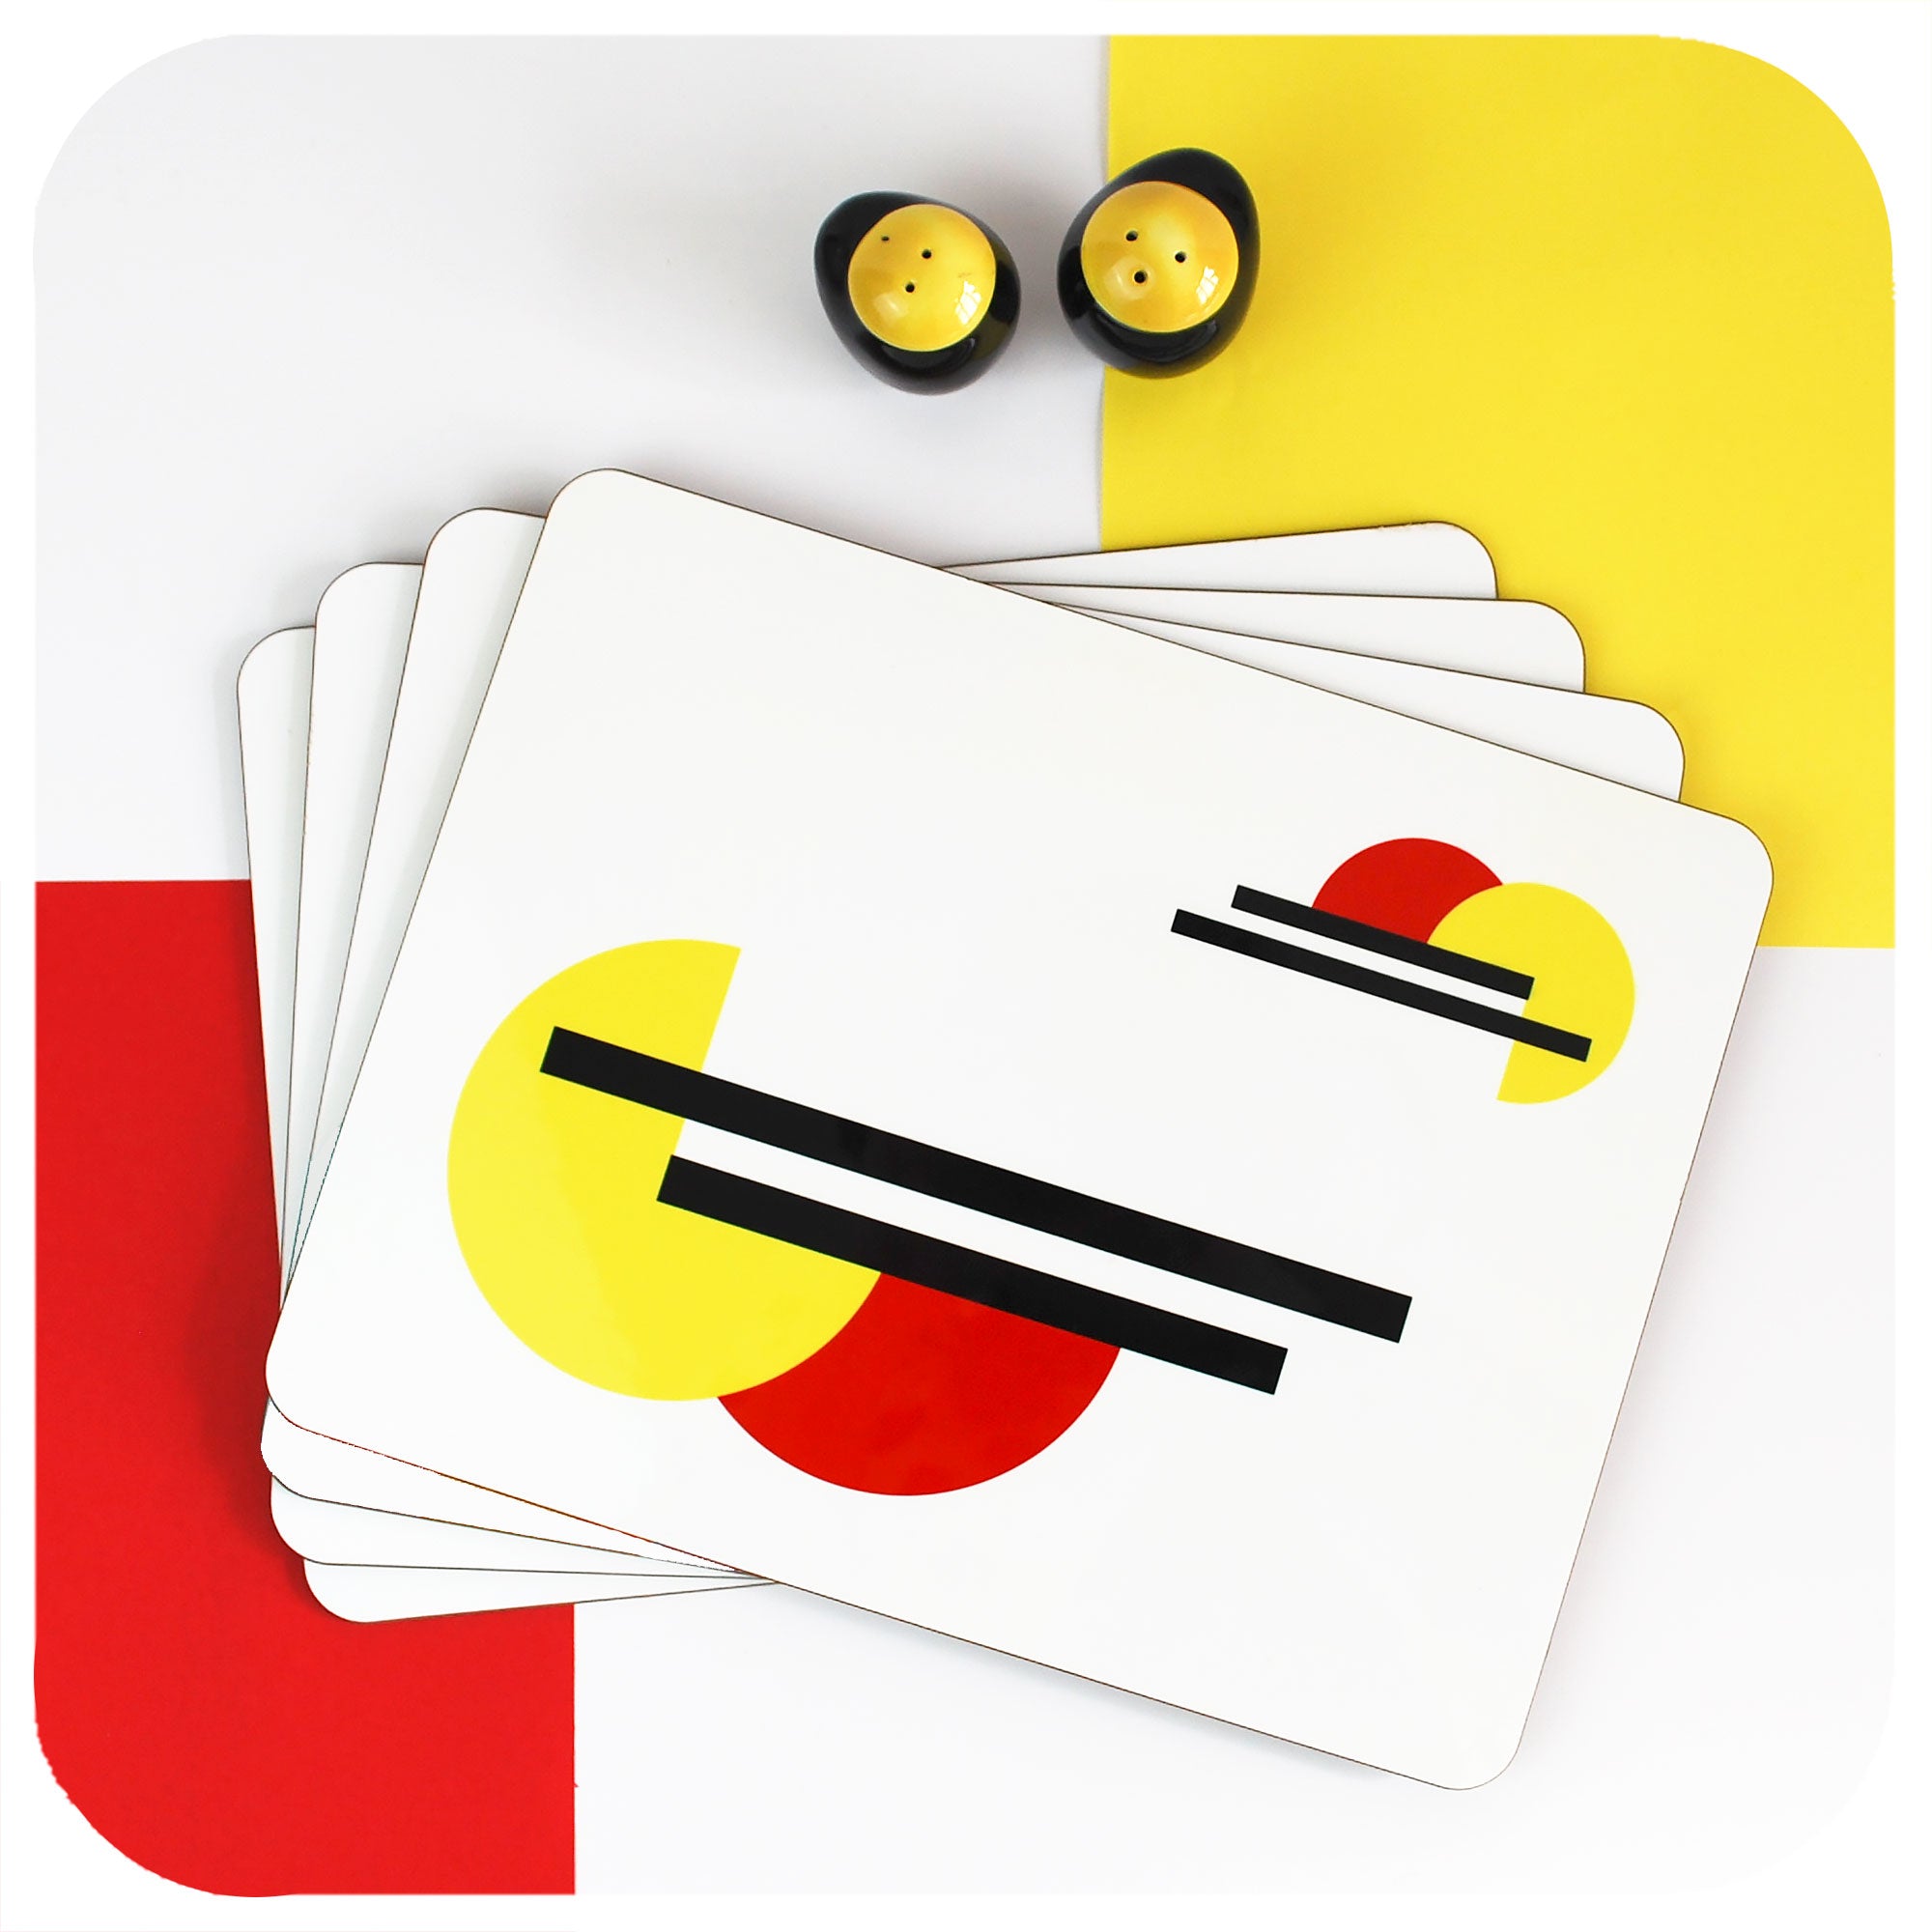 Bauhaus Placemats, set of 4 in a stack with vintage salt & pepper shakers | The Inkabilly Emporium